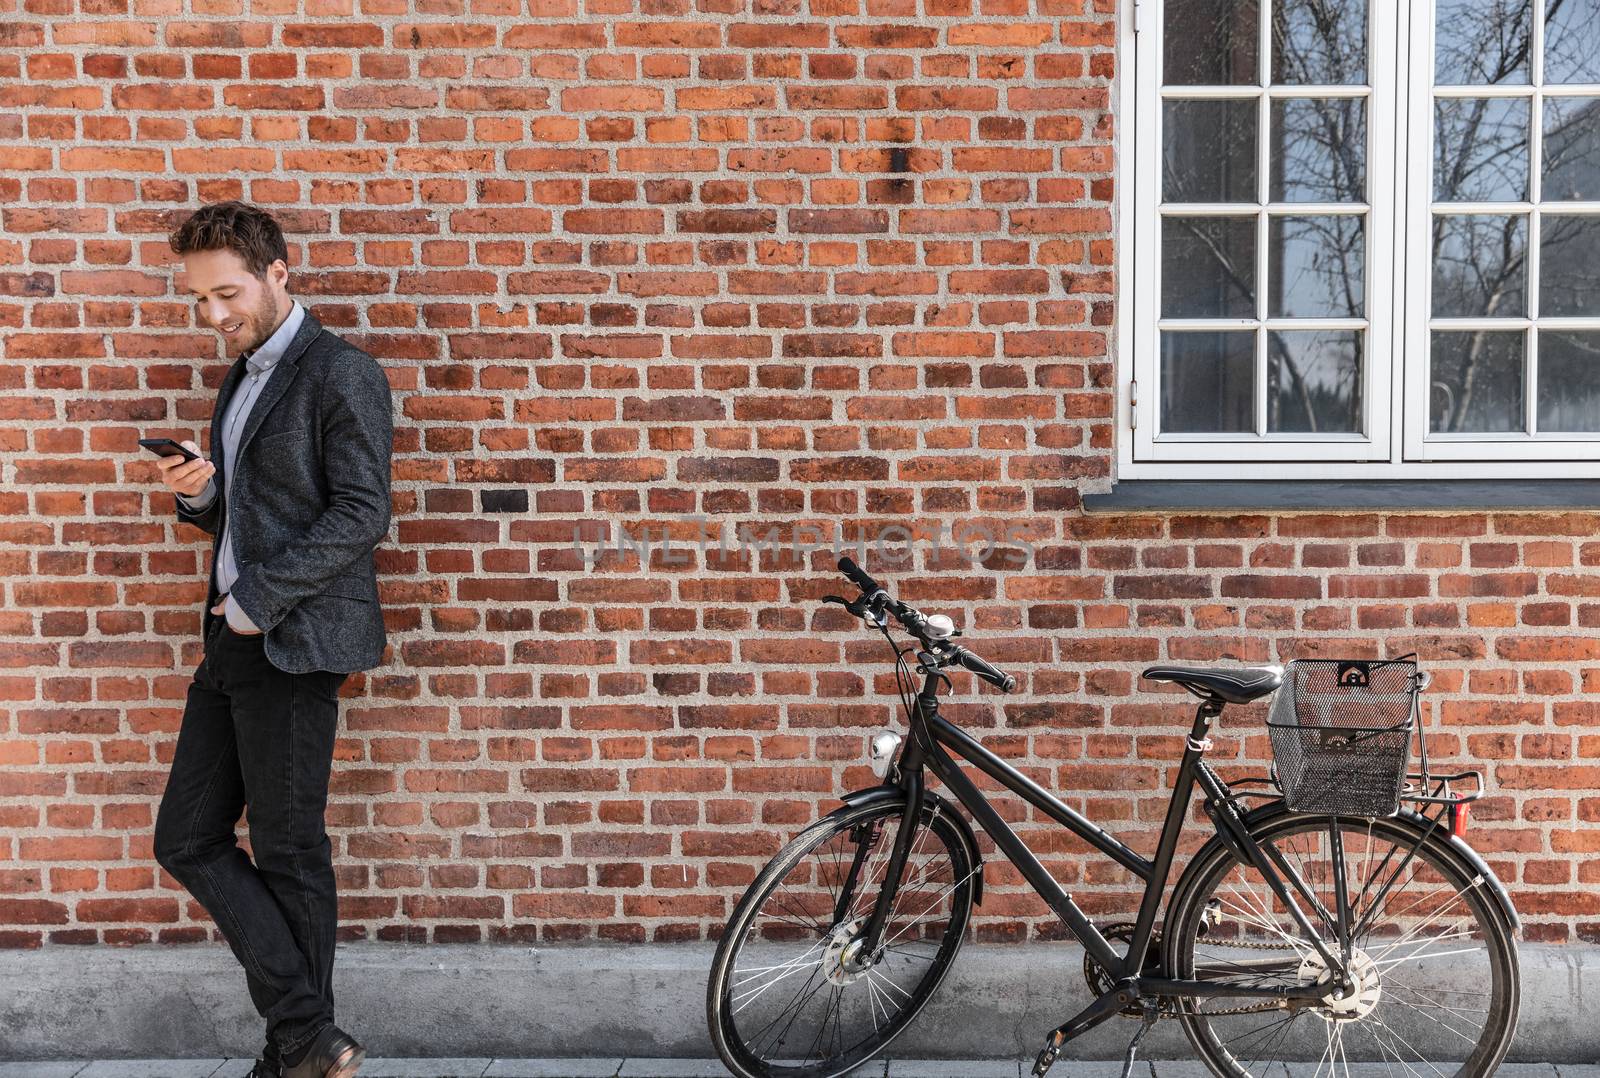 Young businessman going to work on bike commute using his mobile cellphone against city brick wall background. Happy business man bicycle commuter arriving at office using phone texting.